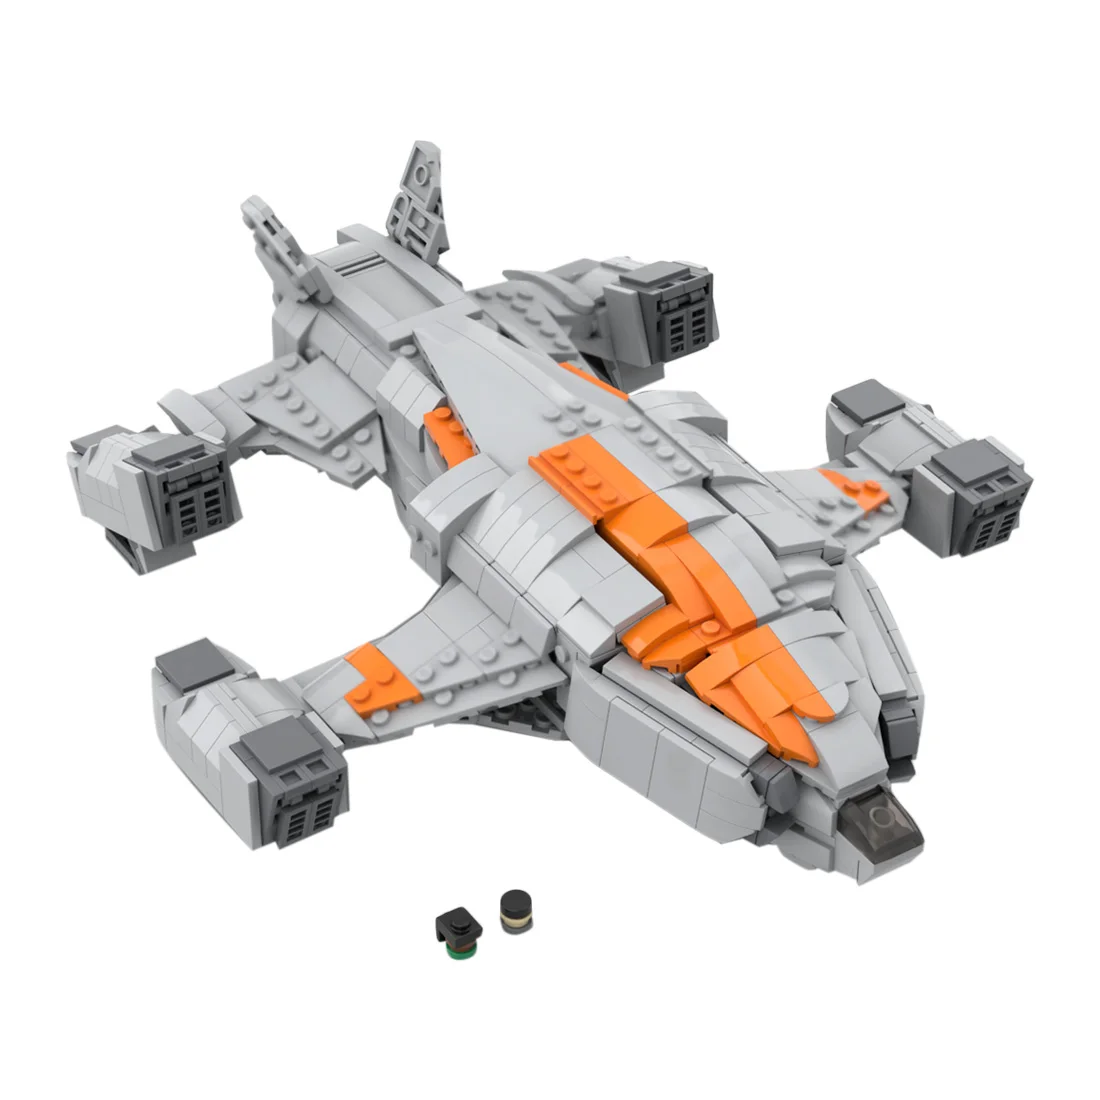 

1171Pcs MOC-68713 1/250 Chieftain Space Wars Sci-fi Warships DIY MOC Building Blocks Kits (Licensed Designed by TheRealBeef1213)